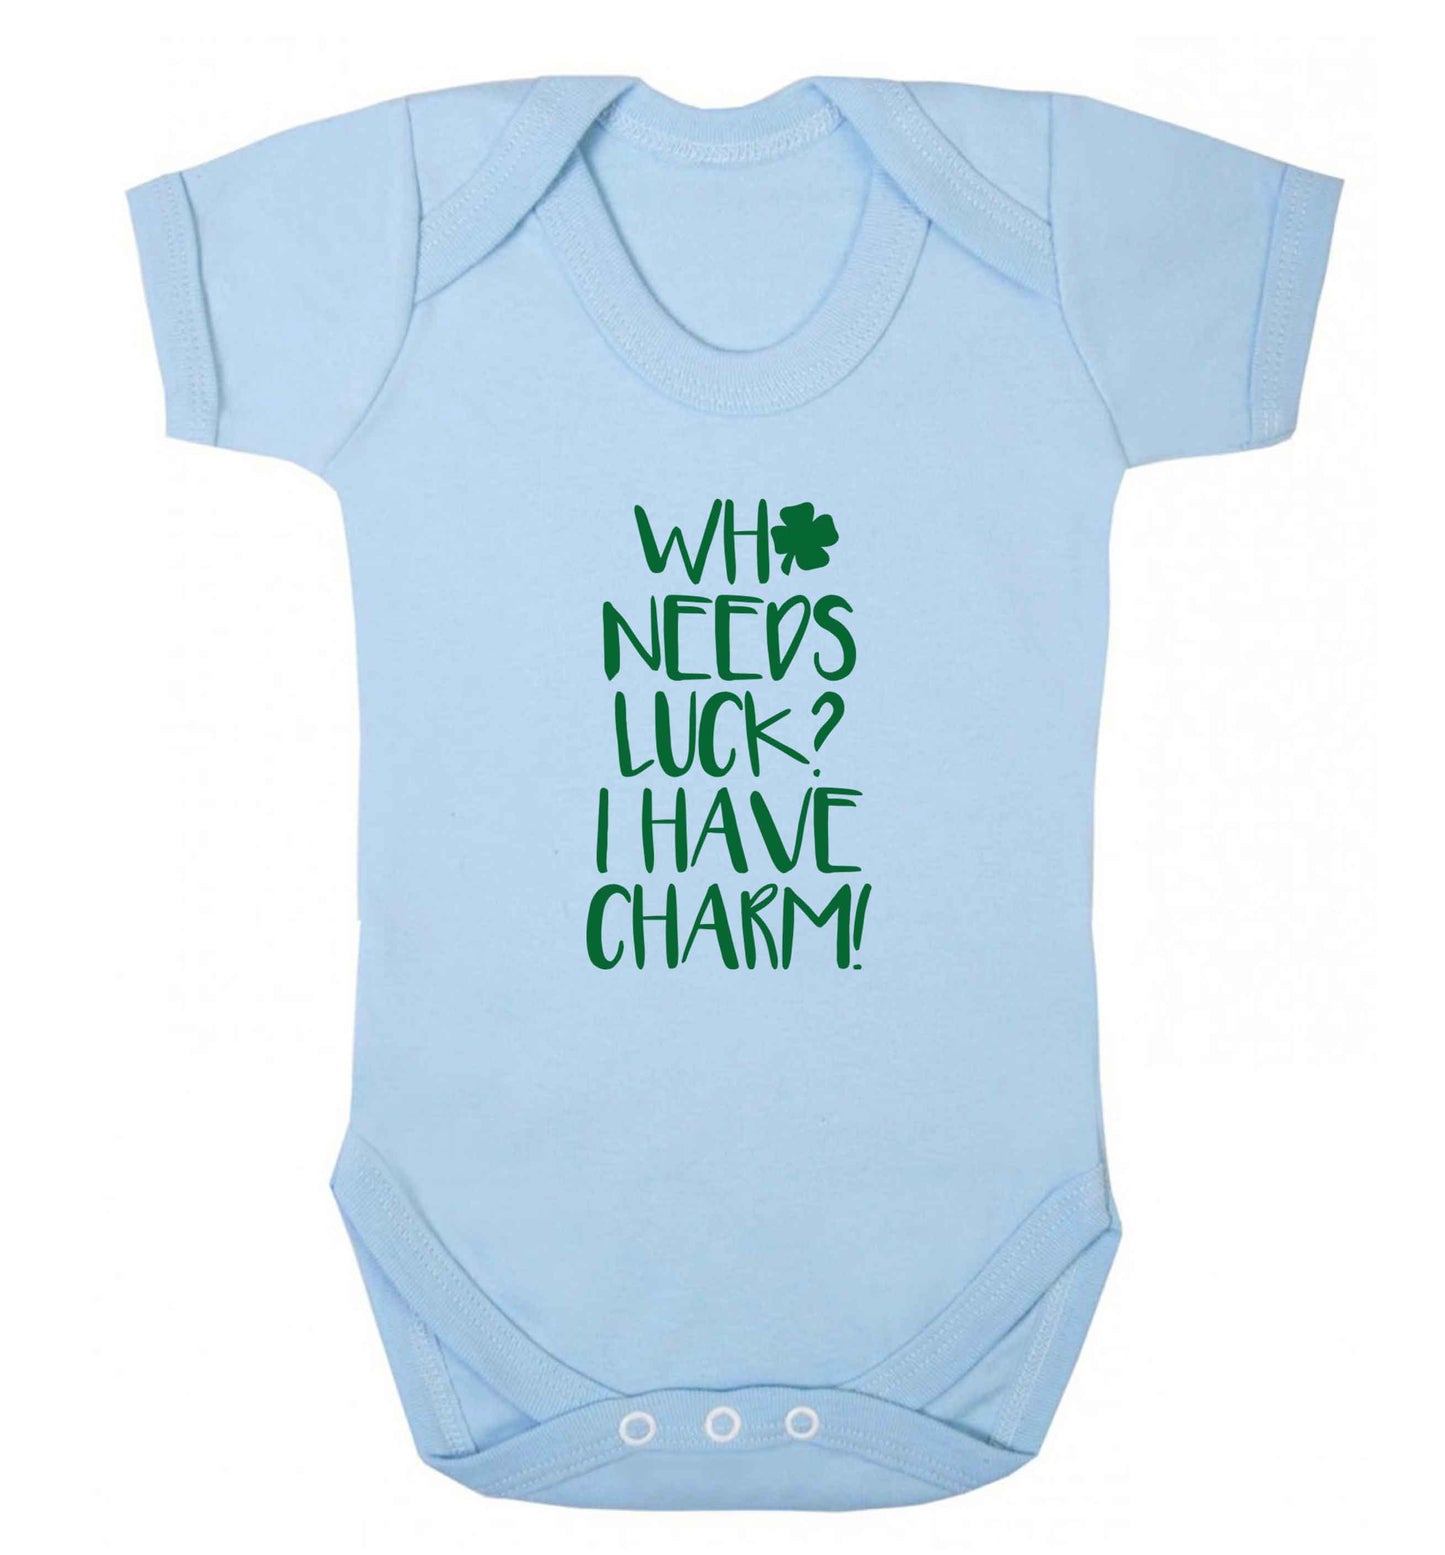 Who needs luck? I have charm! baby vest pale blue 18-24 months